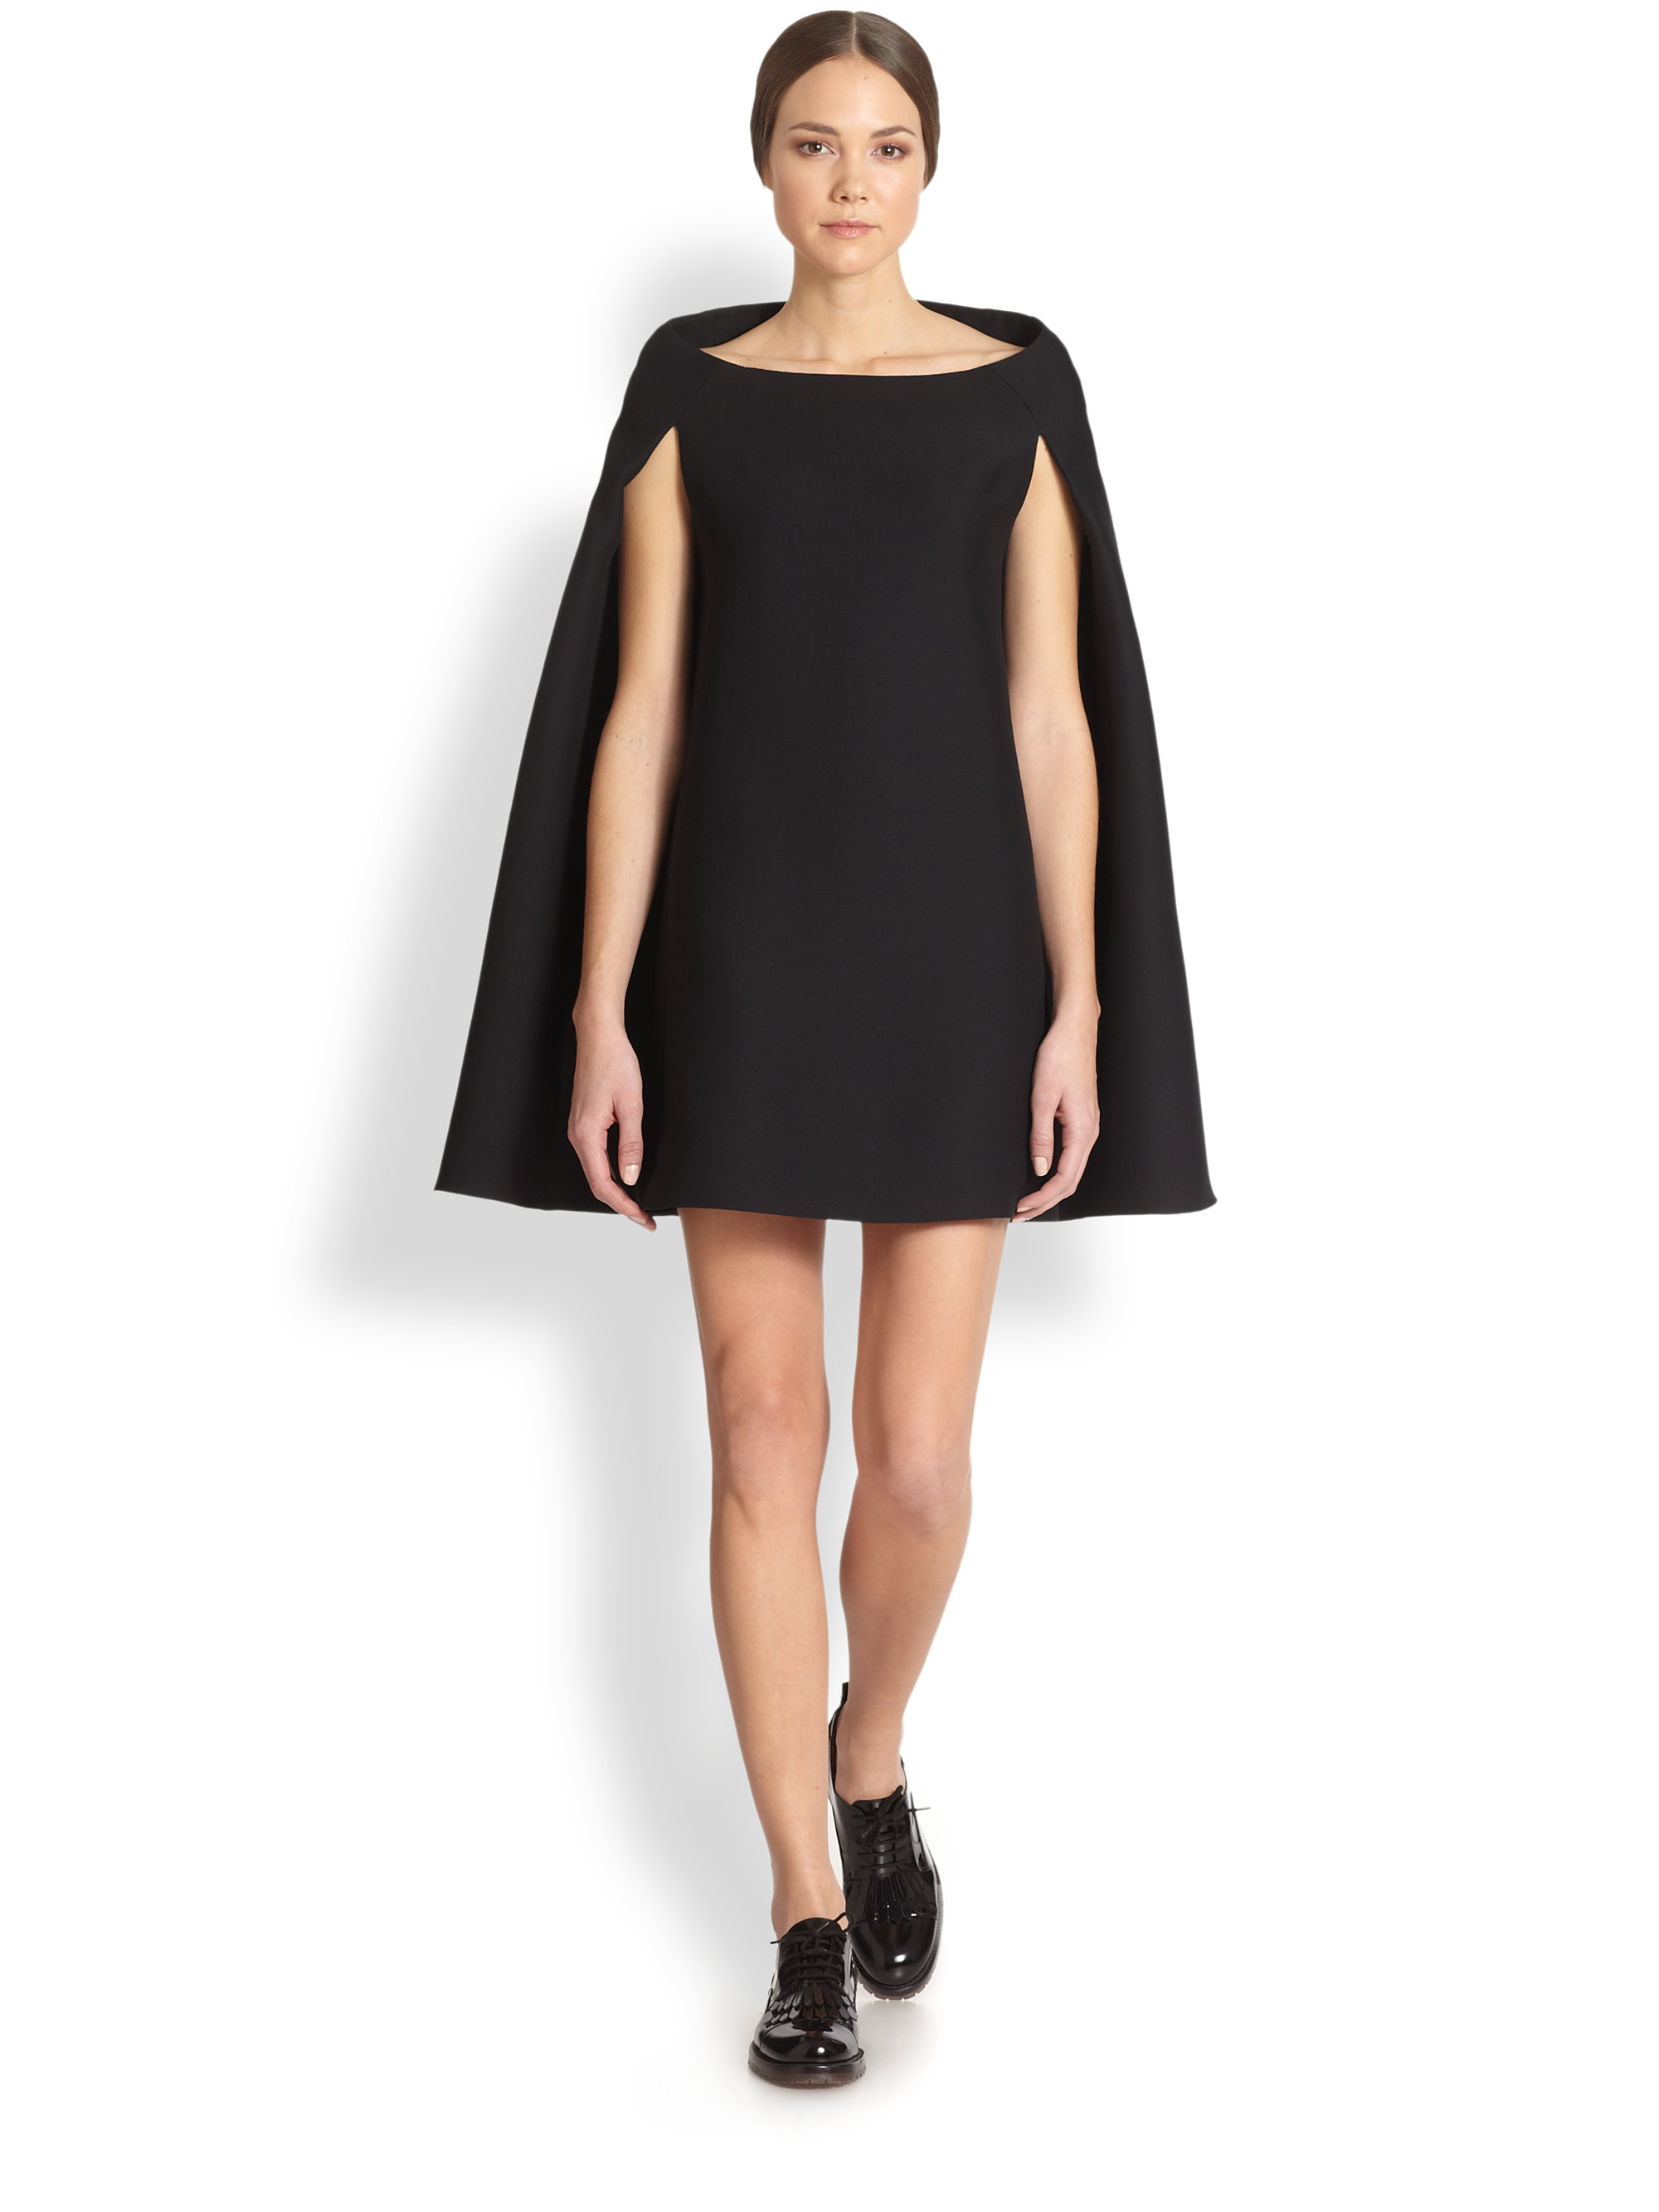 black dress with cape attached